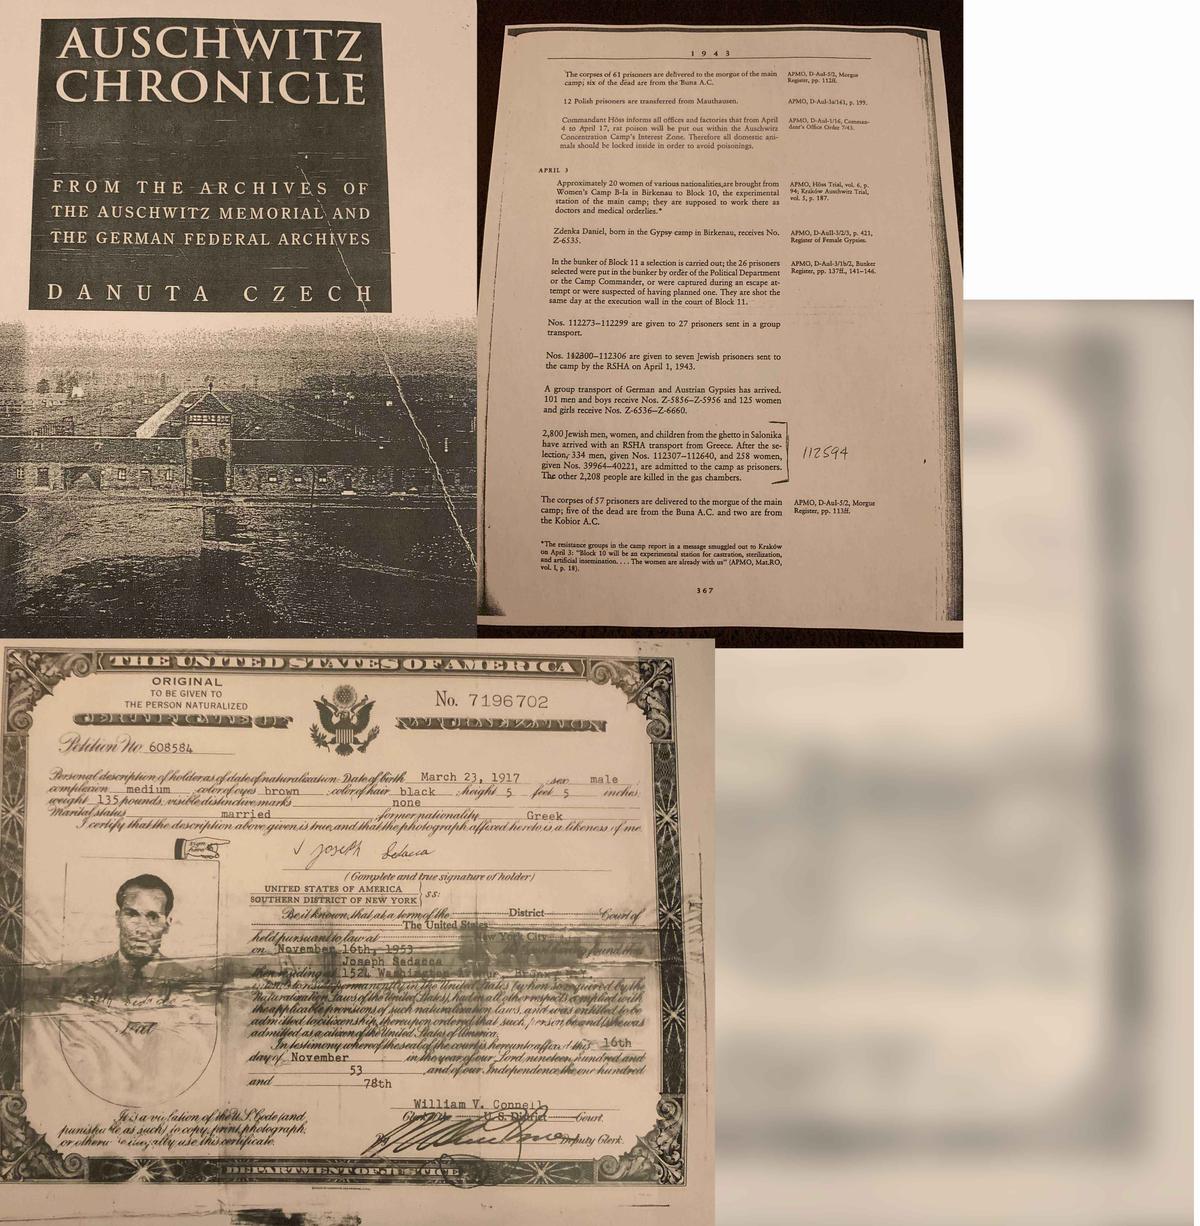 (Top Left) Cover page of book "Auschwitz Chronicle; (Top Right) A page from "Auschwitz Chronicle" that shows Joseph Sedacca’s "war number," denoting his admission into the concentration camps; (Bottom) Joseph Sedacca’s American naturalization certificate. (Courtesy of Janice Clough)